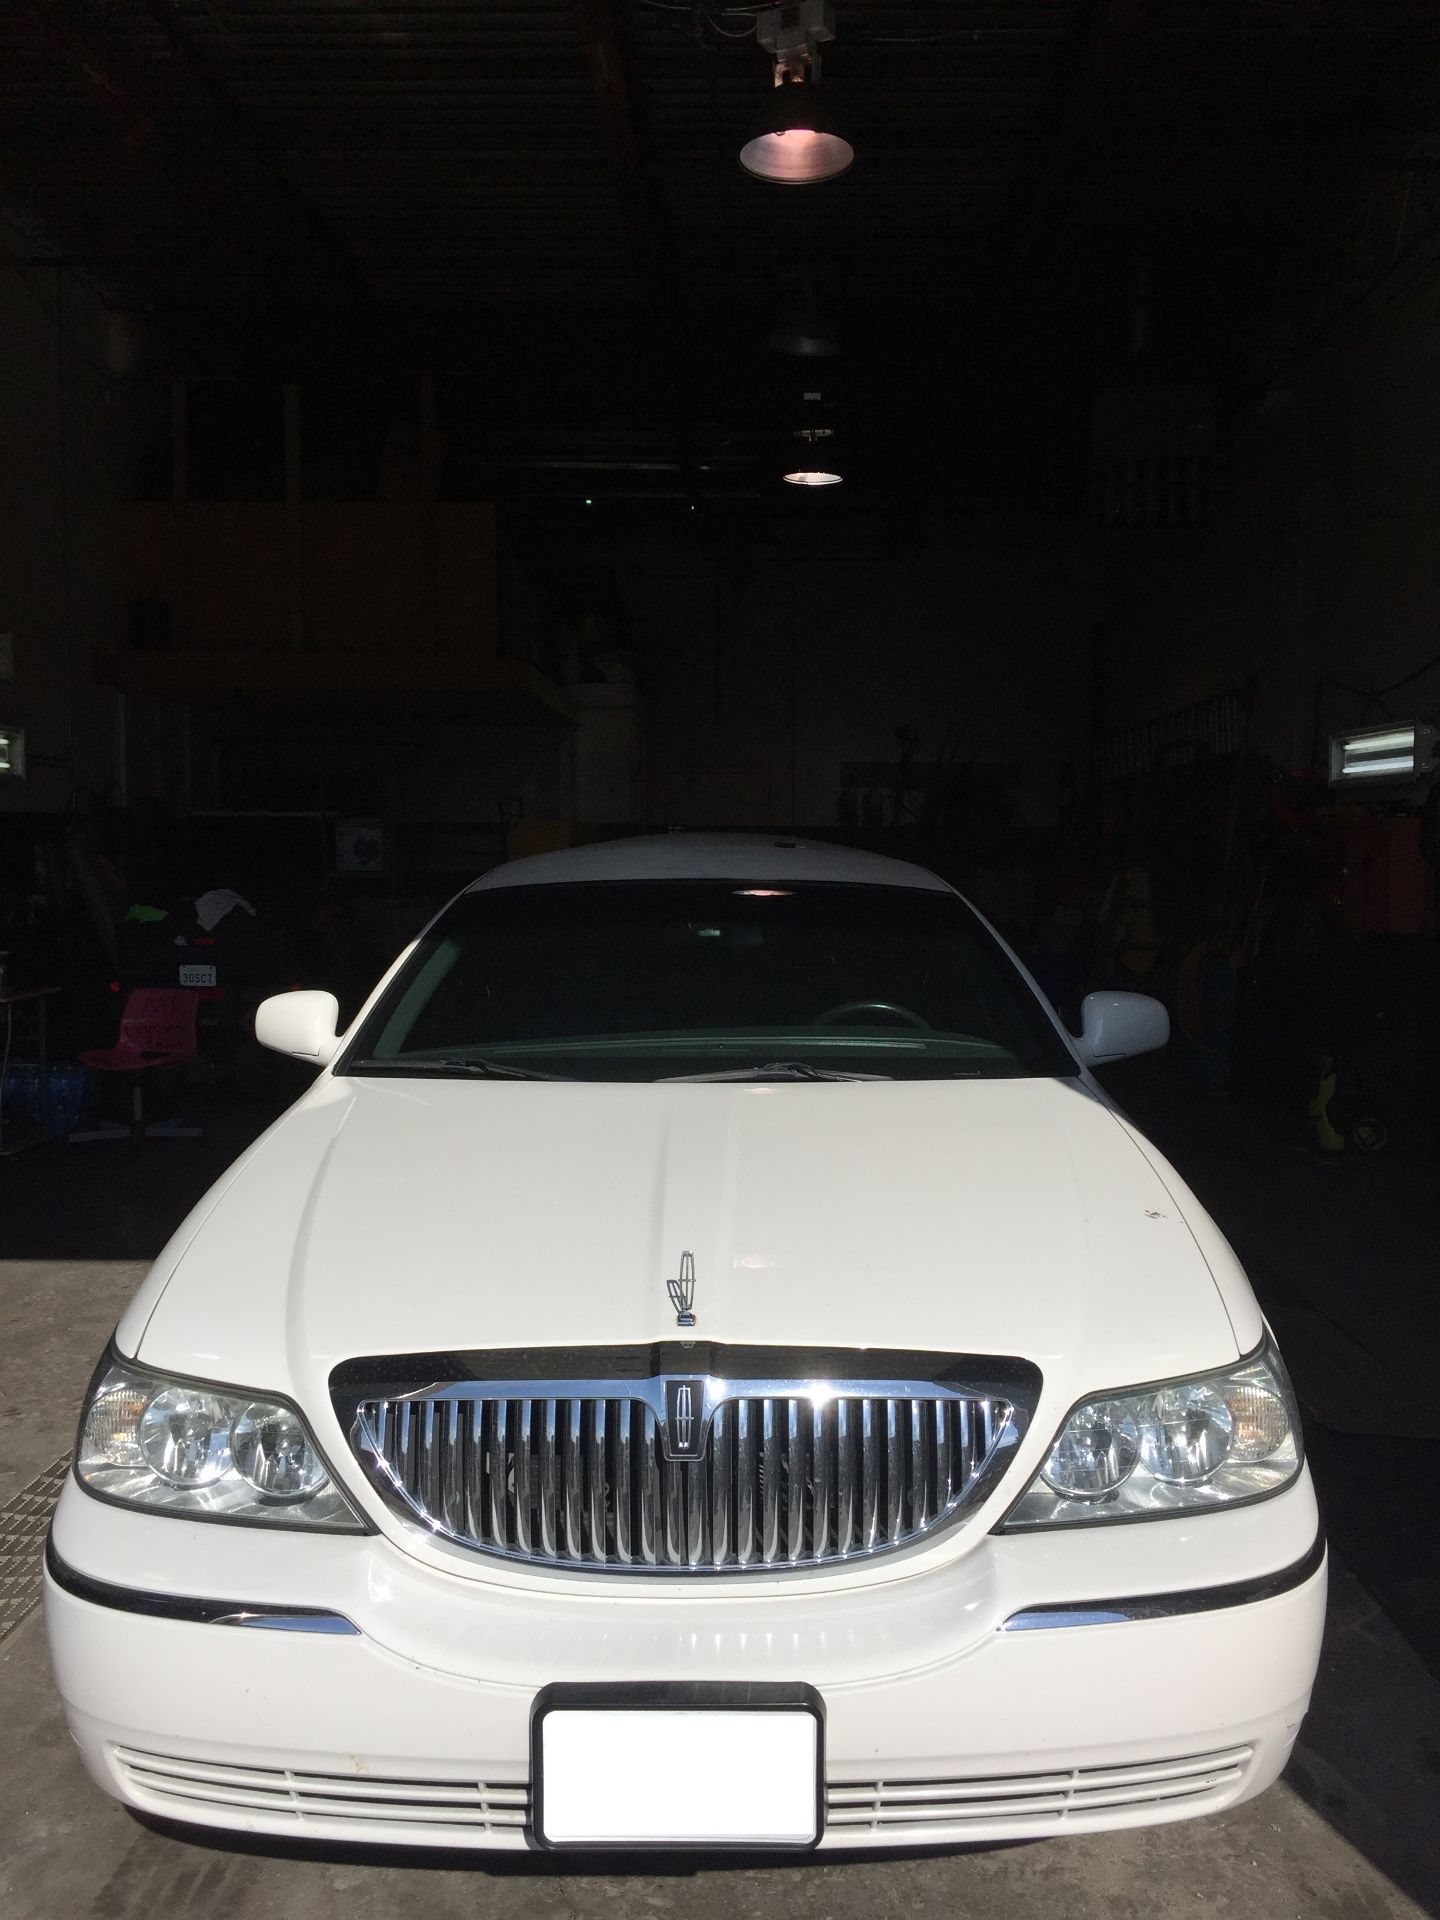 2007 Lincoln Town Car Stretch - 10 Passenger by Executive Coach - 58,600 Miles